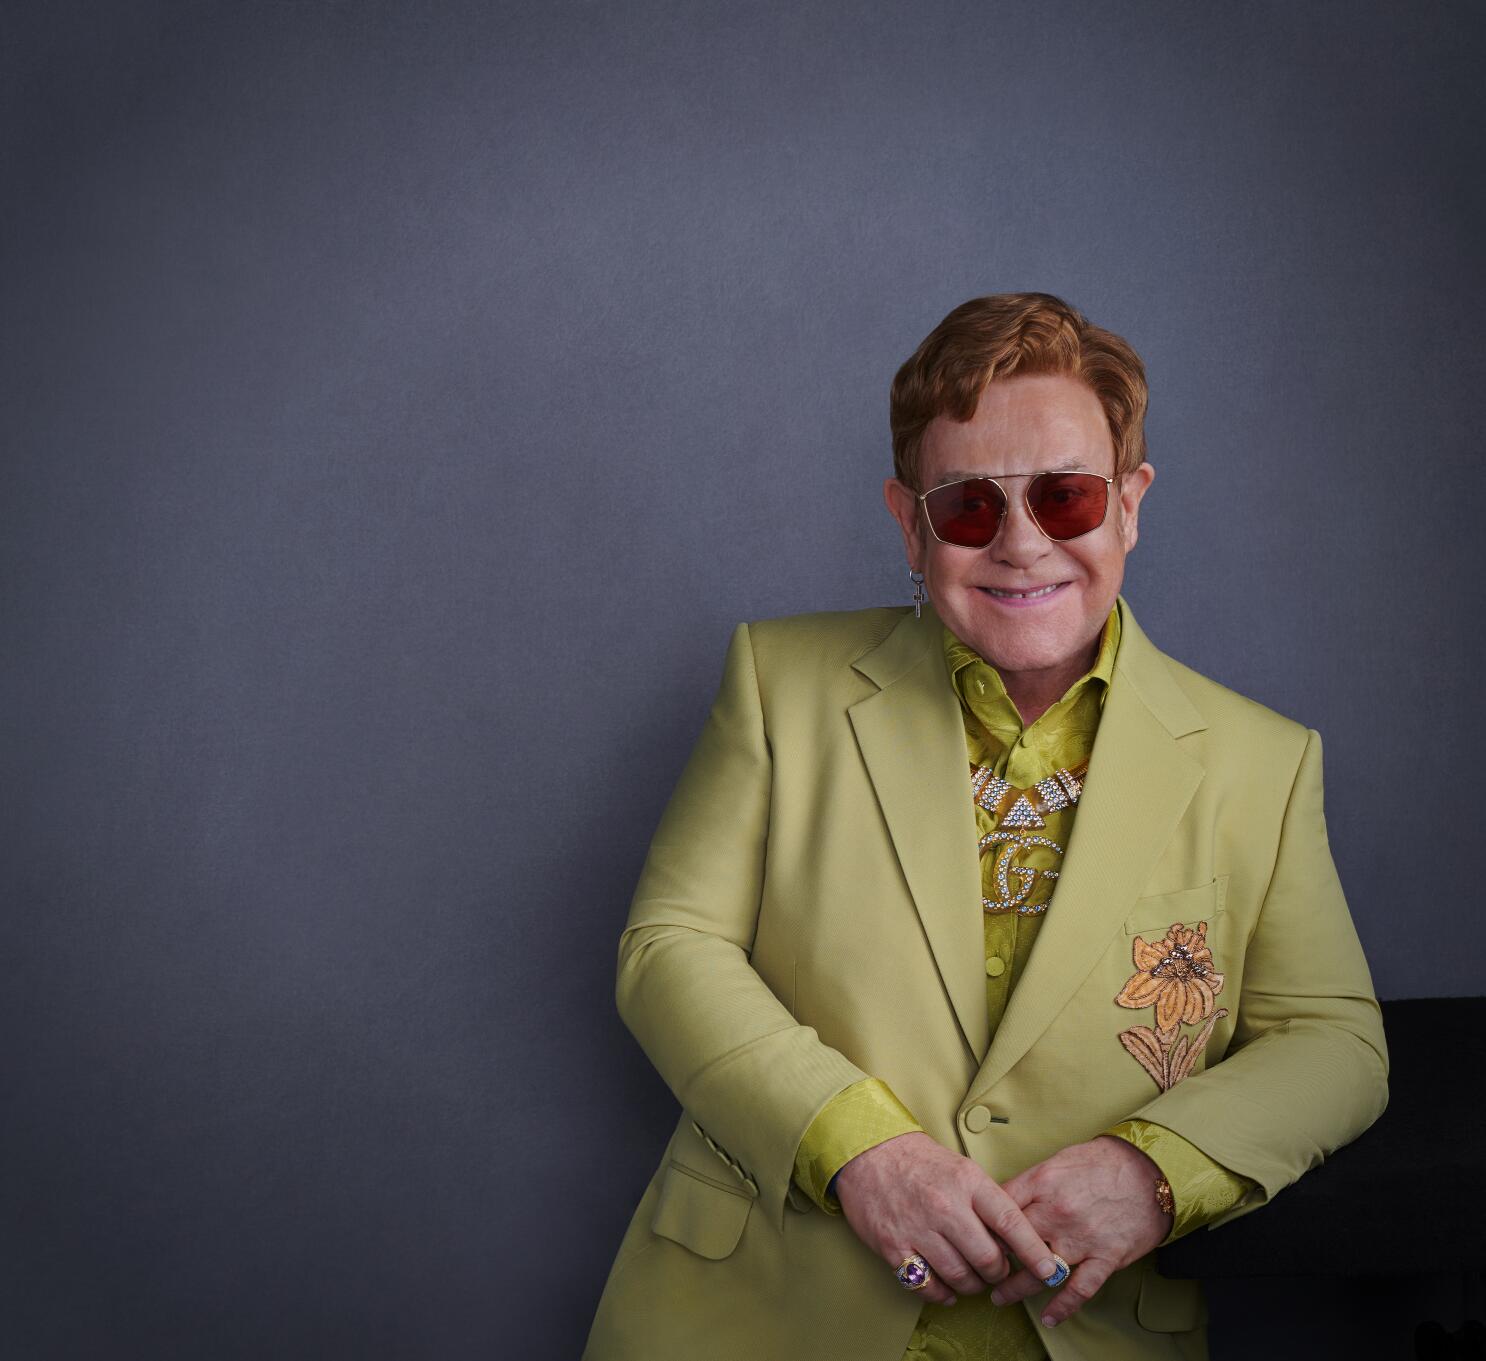 How Four Old Elton John Songs Became a New No. 1 Hit